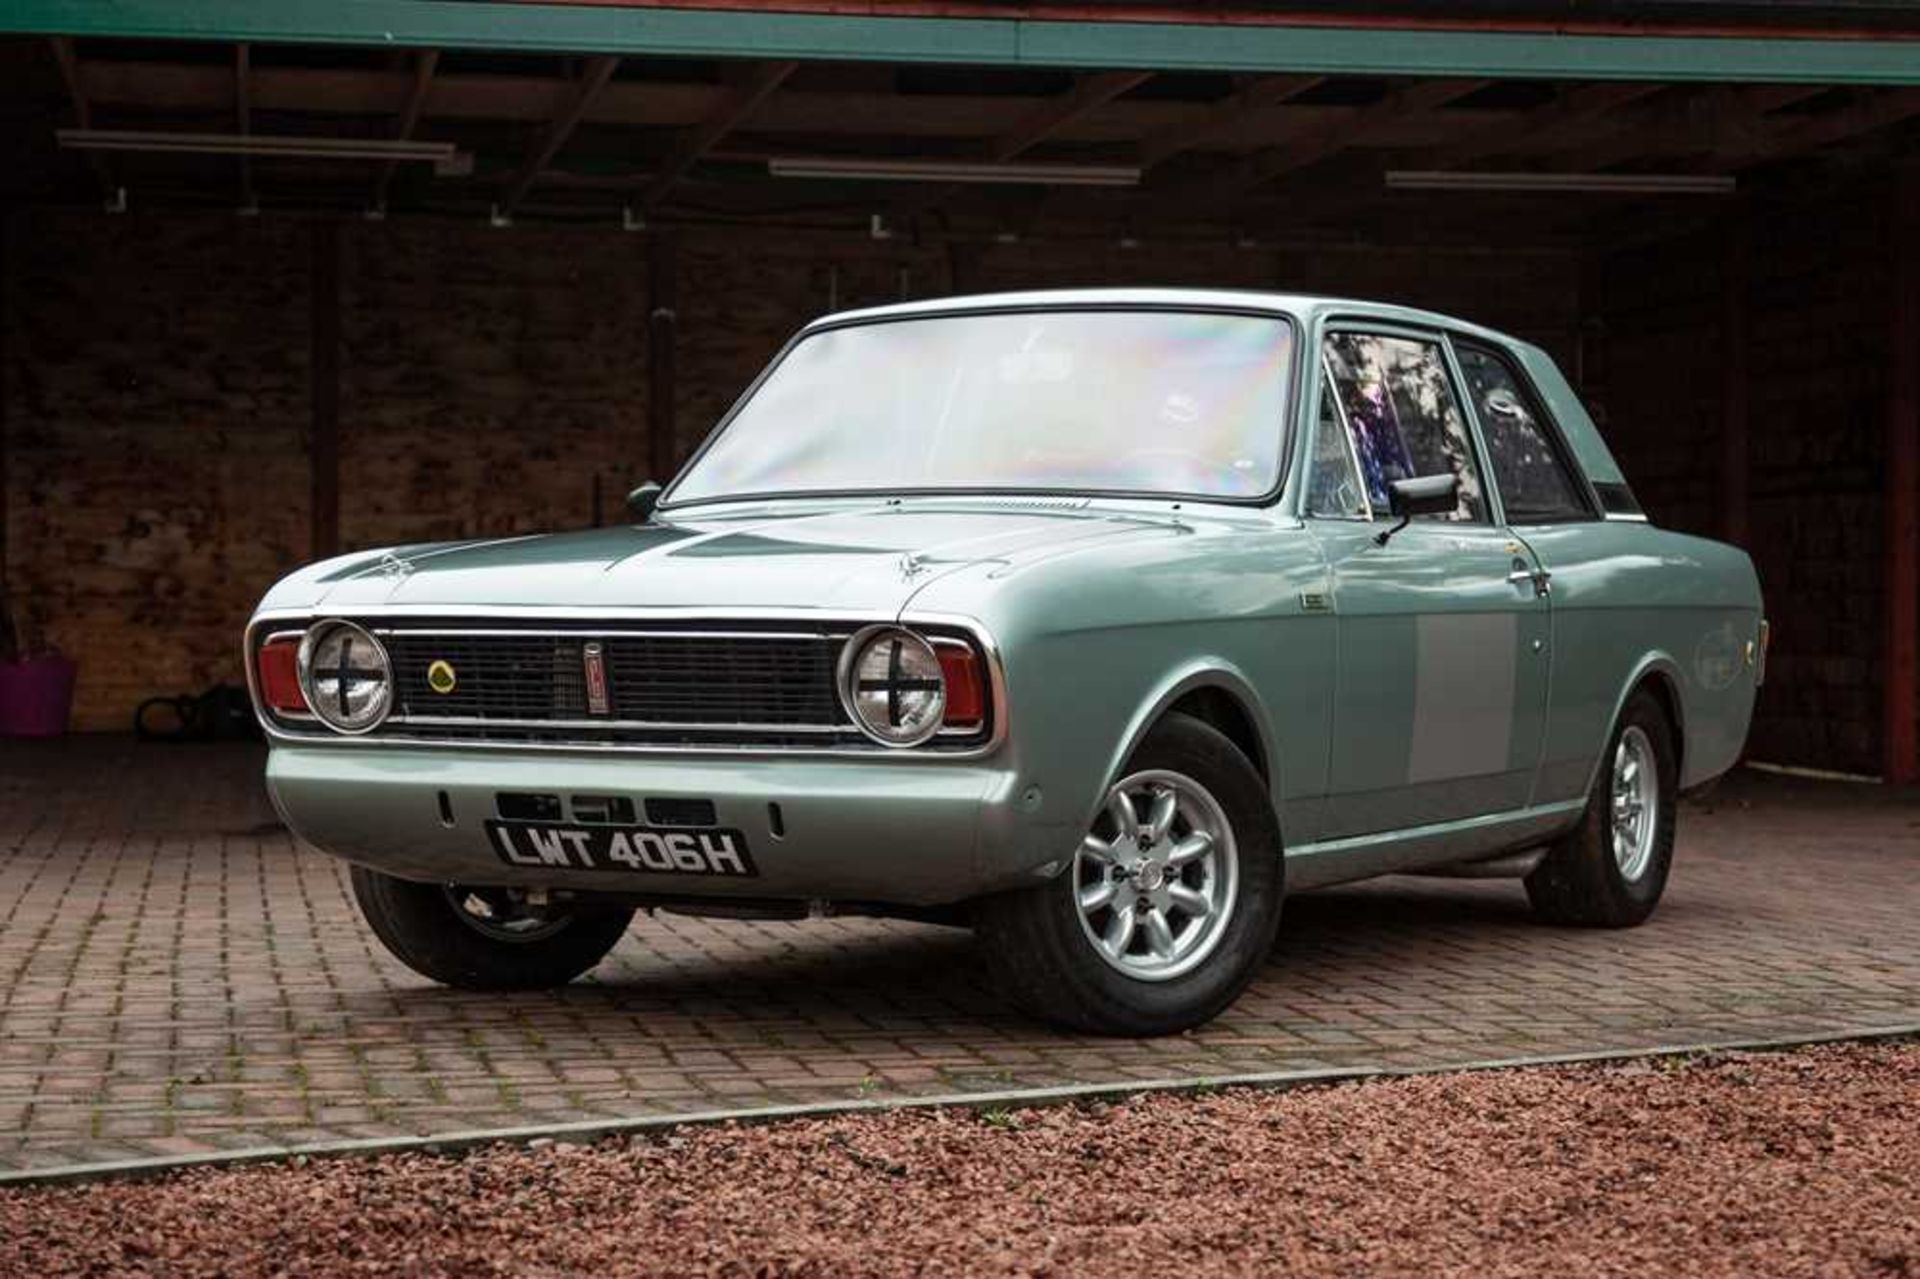 1969 Ford Cortina 'Lotus' Competition Saloon Powered by a 1598cc FIA-legal Lotus Twin-Cam with Twin - Image 2 of 55